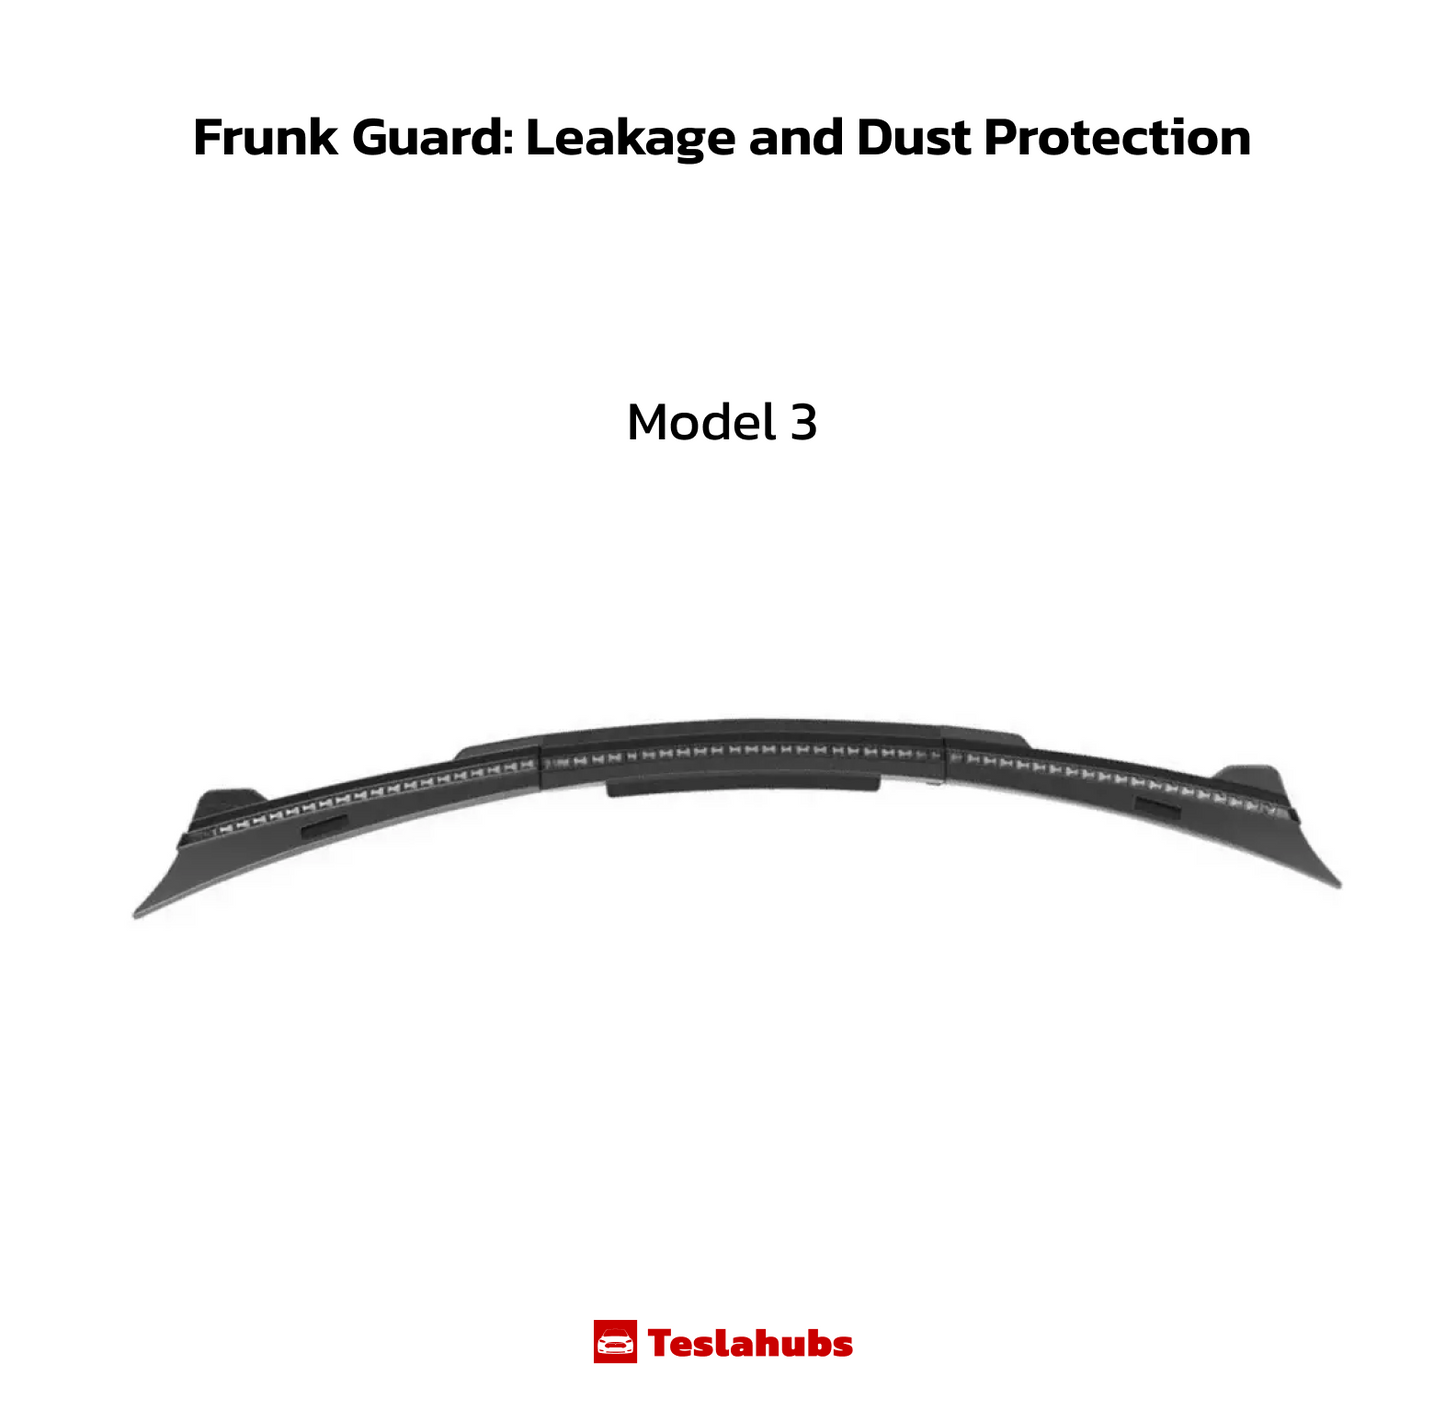 Teslahubs™ Frunk Guard: Leakage and Dust Protection